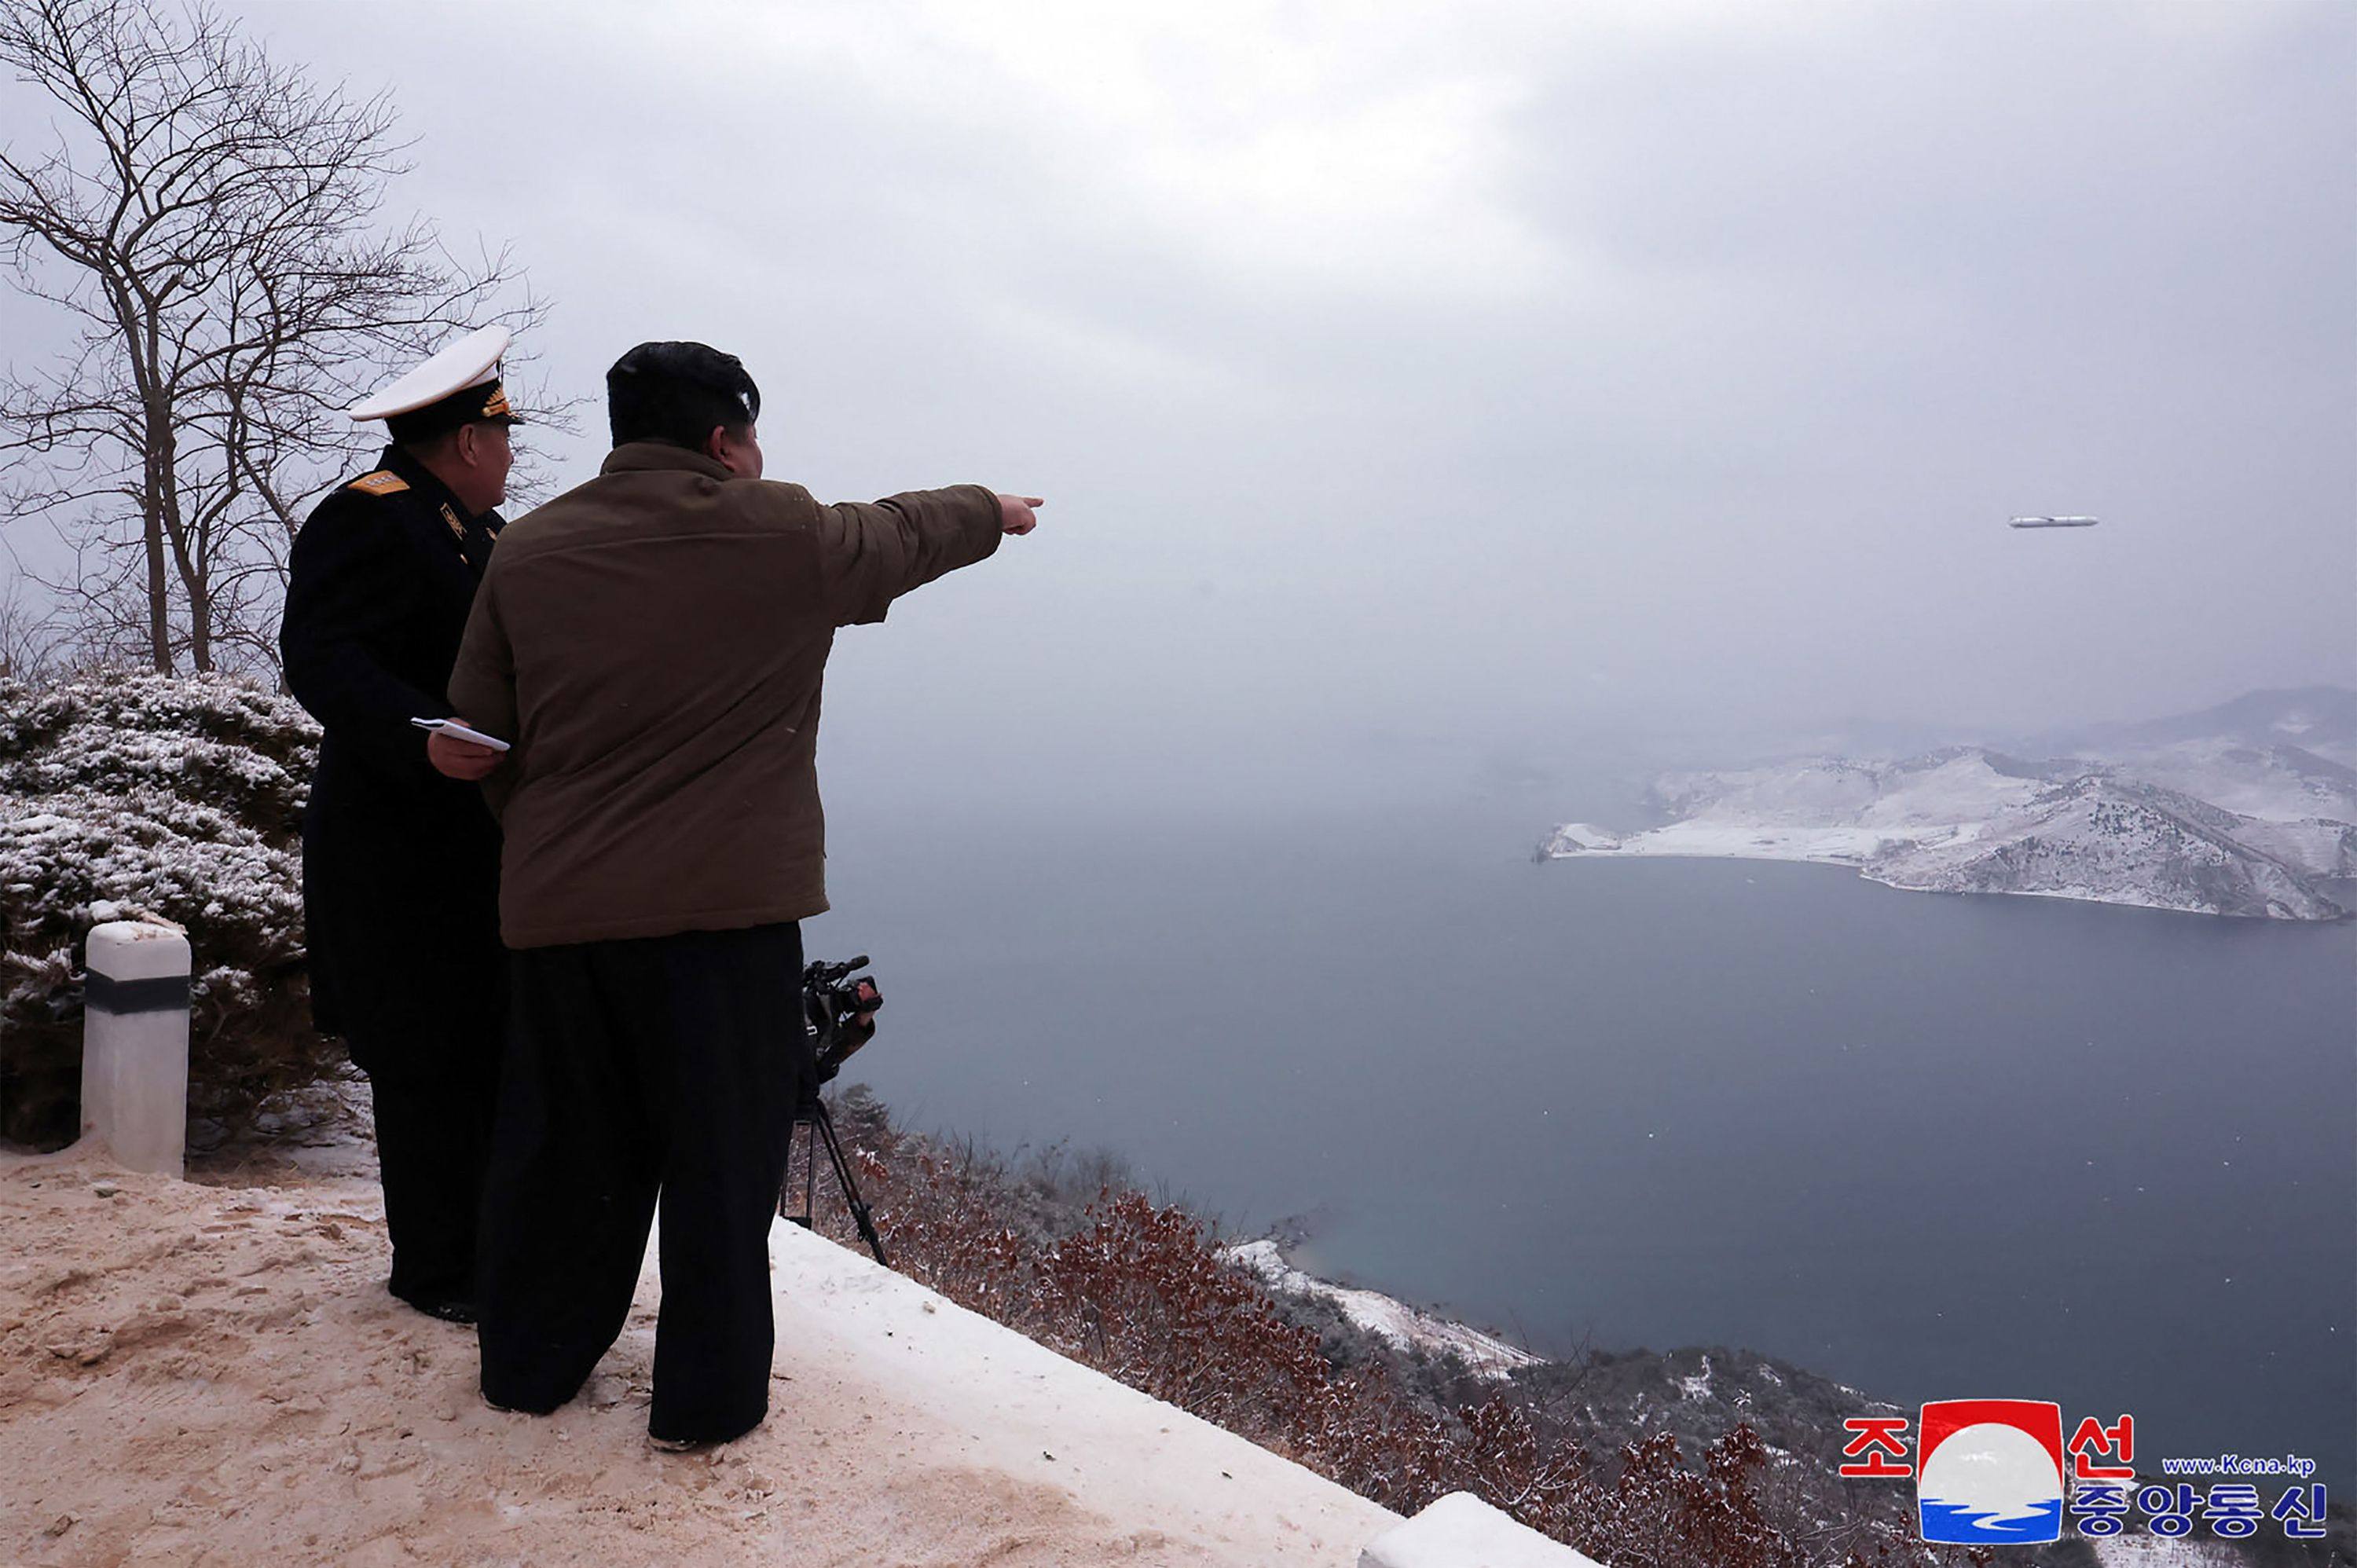 North Korean leader Kim Jong-un watches the test-firing of a submarine-launched strategic cruise missile, codenamed “Pulhwasal-3-31”, in this image released by state media. Photo: KCNA via KNS/AFP